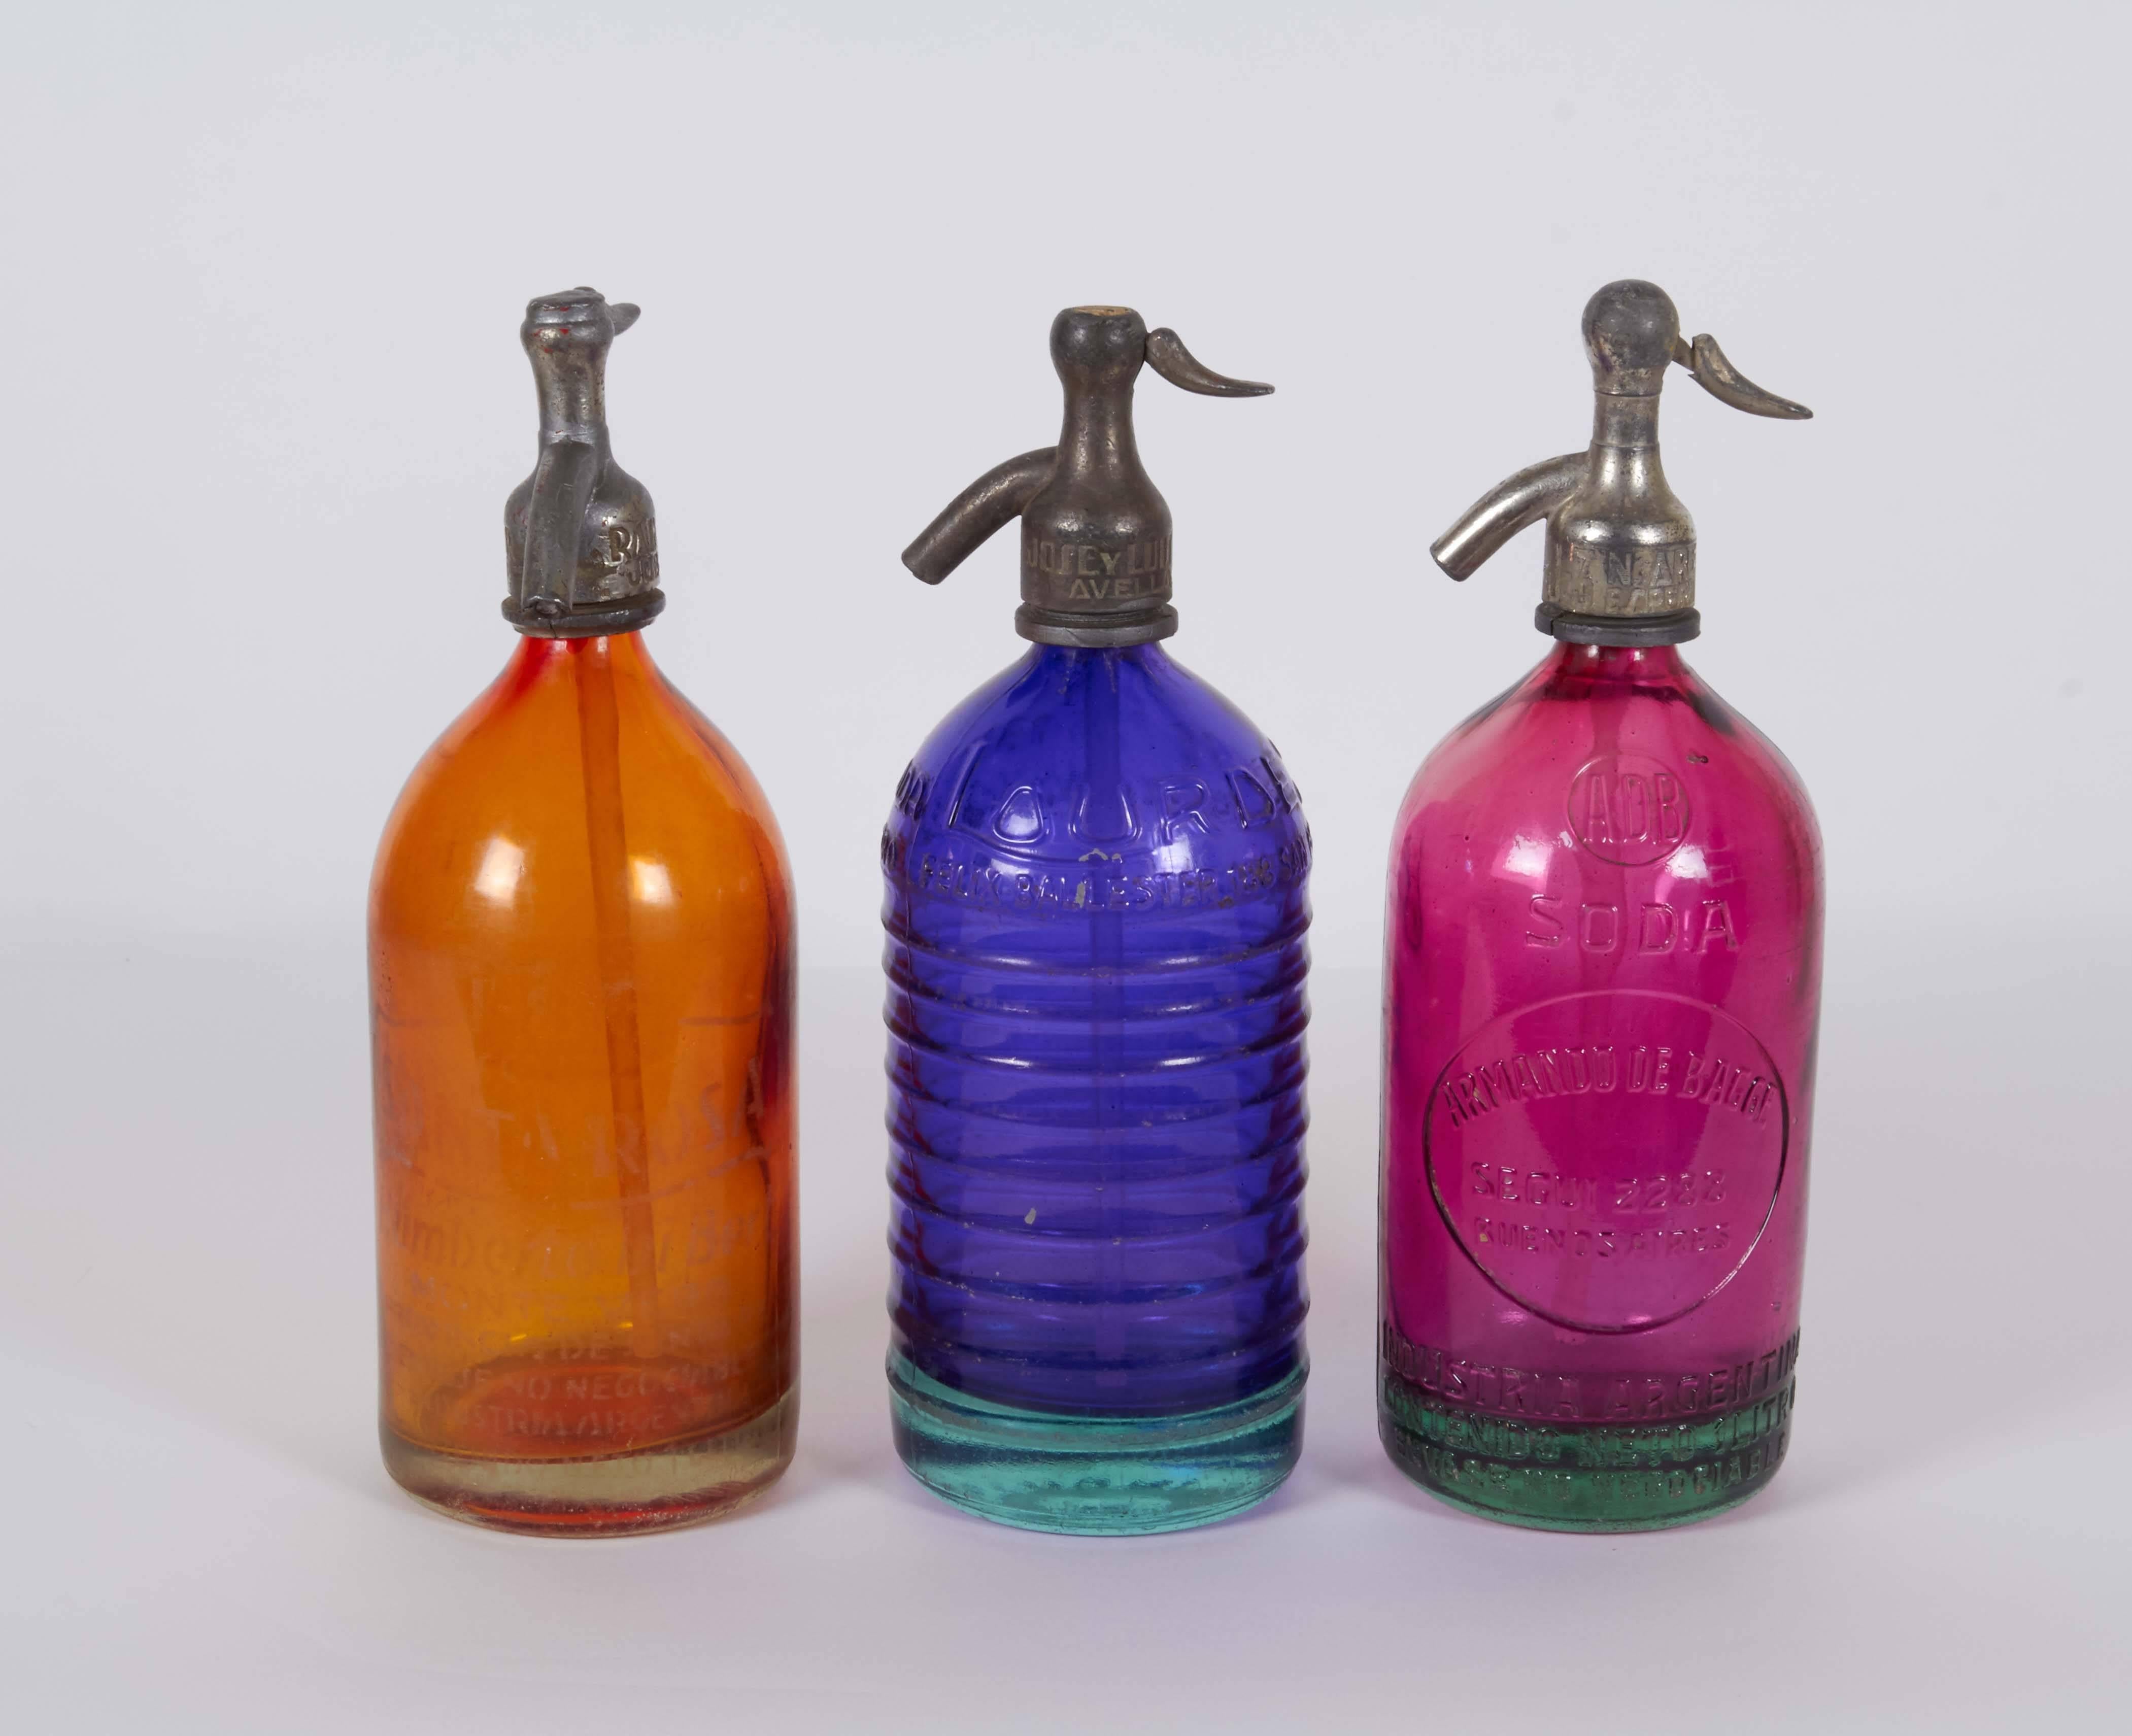 A set of three Art Deco era seltzer bottles, produced in Argentina, circa 1940s in vibrant colored glass, rare tones of orange, cobalt blue and fuchsia. Markings included to the metal nozzles and glass. The bottles remain in good vintage condition,